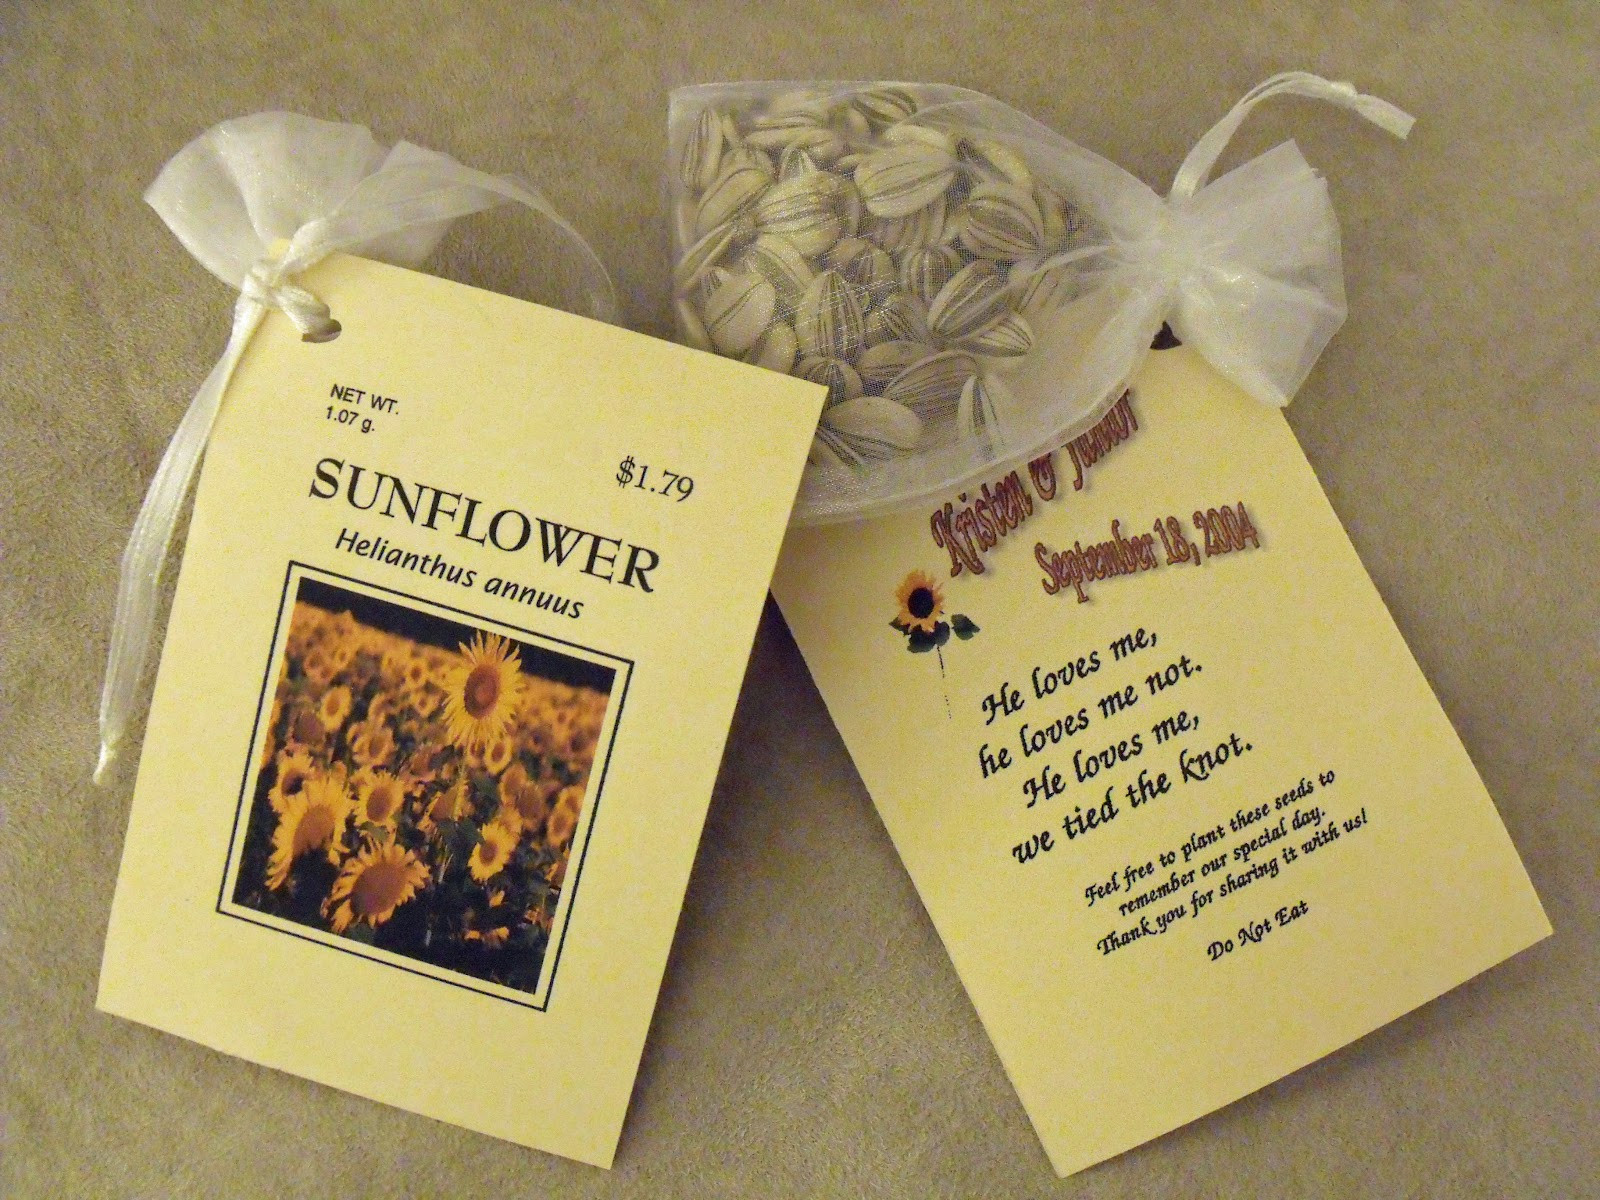 Wedding Favor Seed Packets
 A Few My Favorite Things Sunflower Seed "Packet